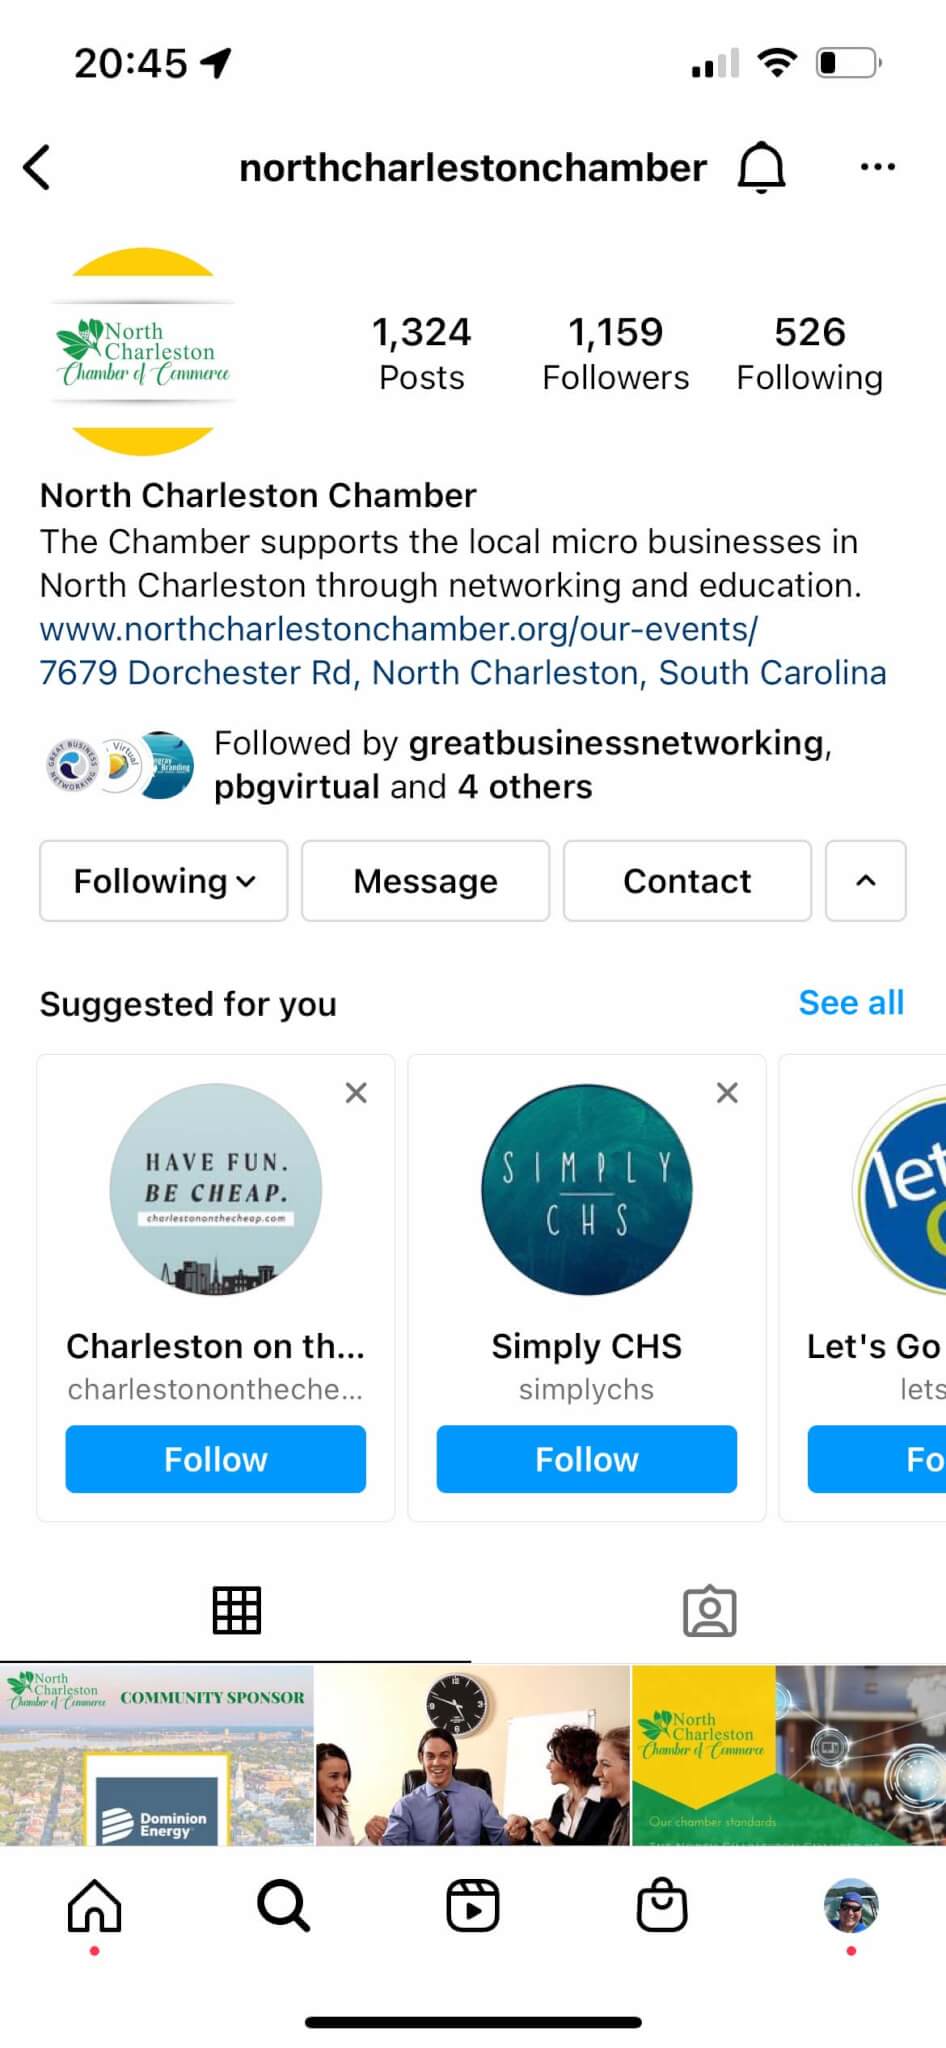 North Charleston Chamber of Commerce social media management client 